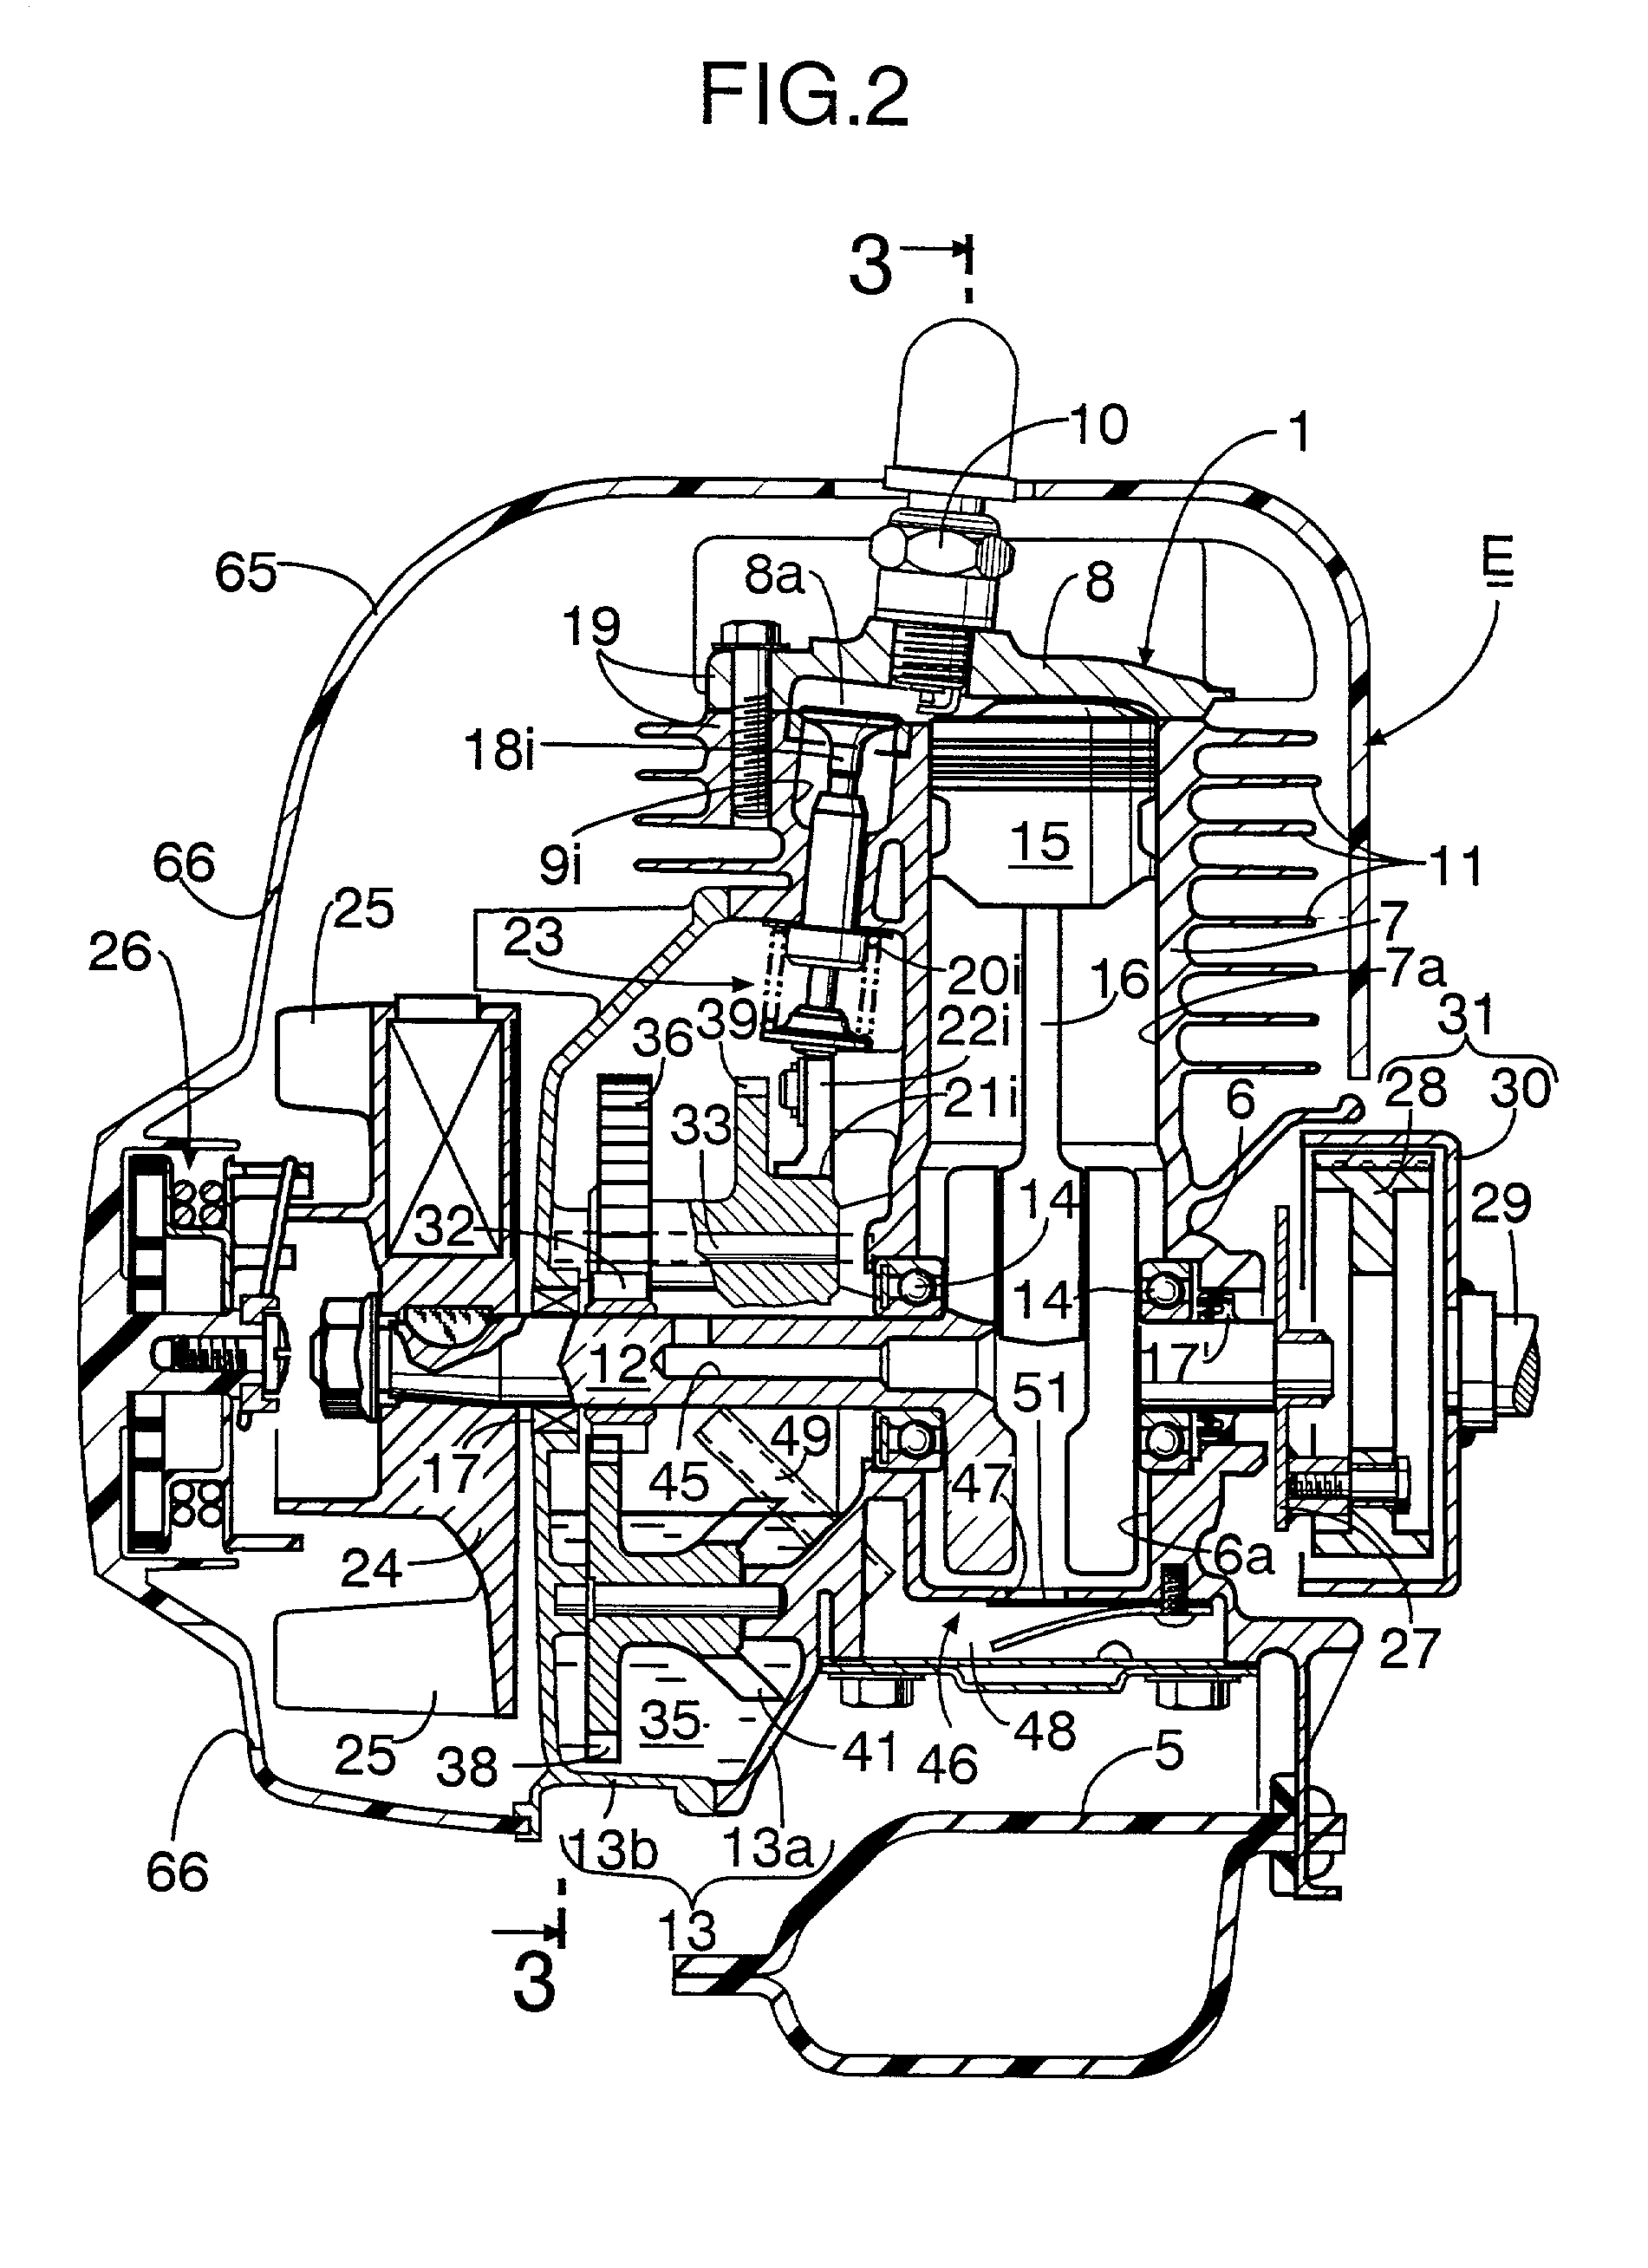 Handheld type four-cycle engine